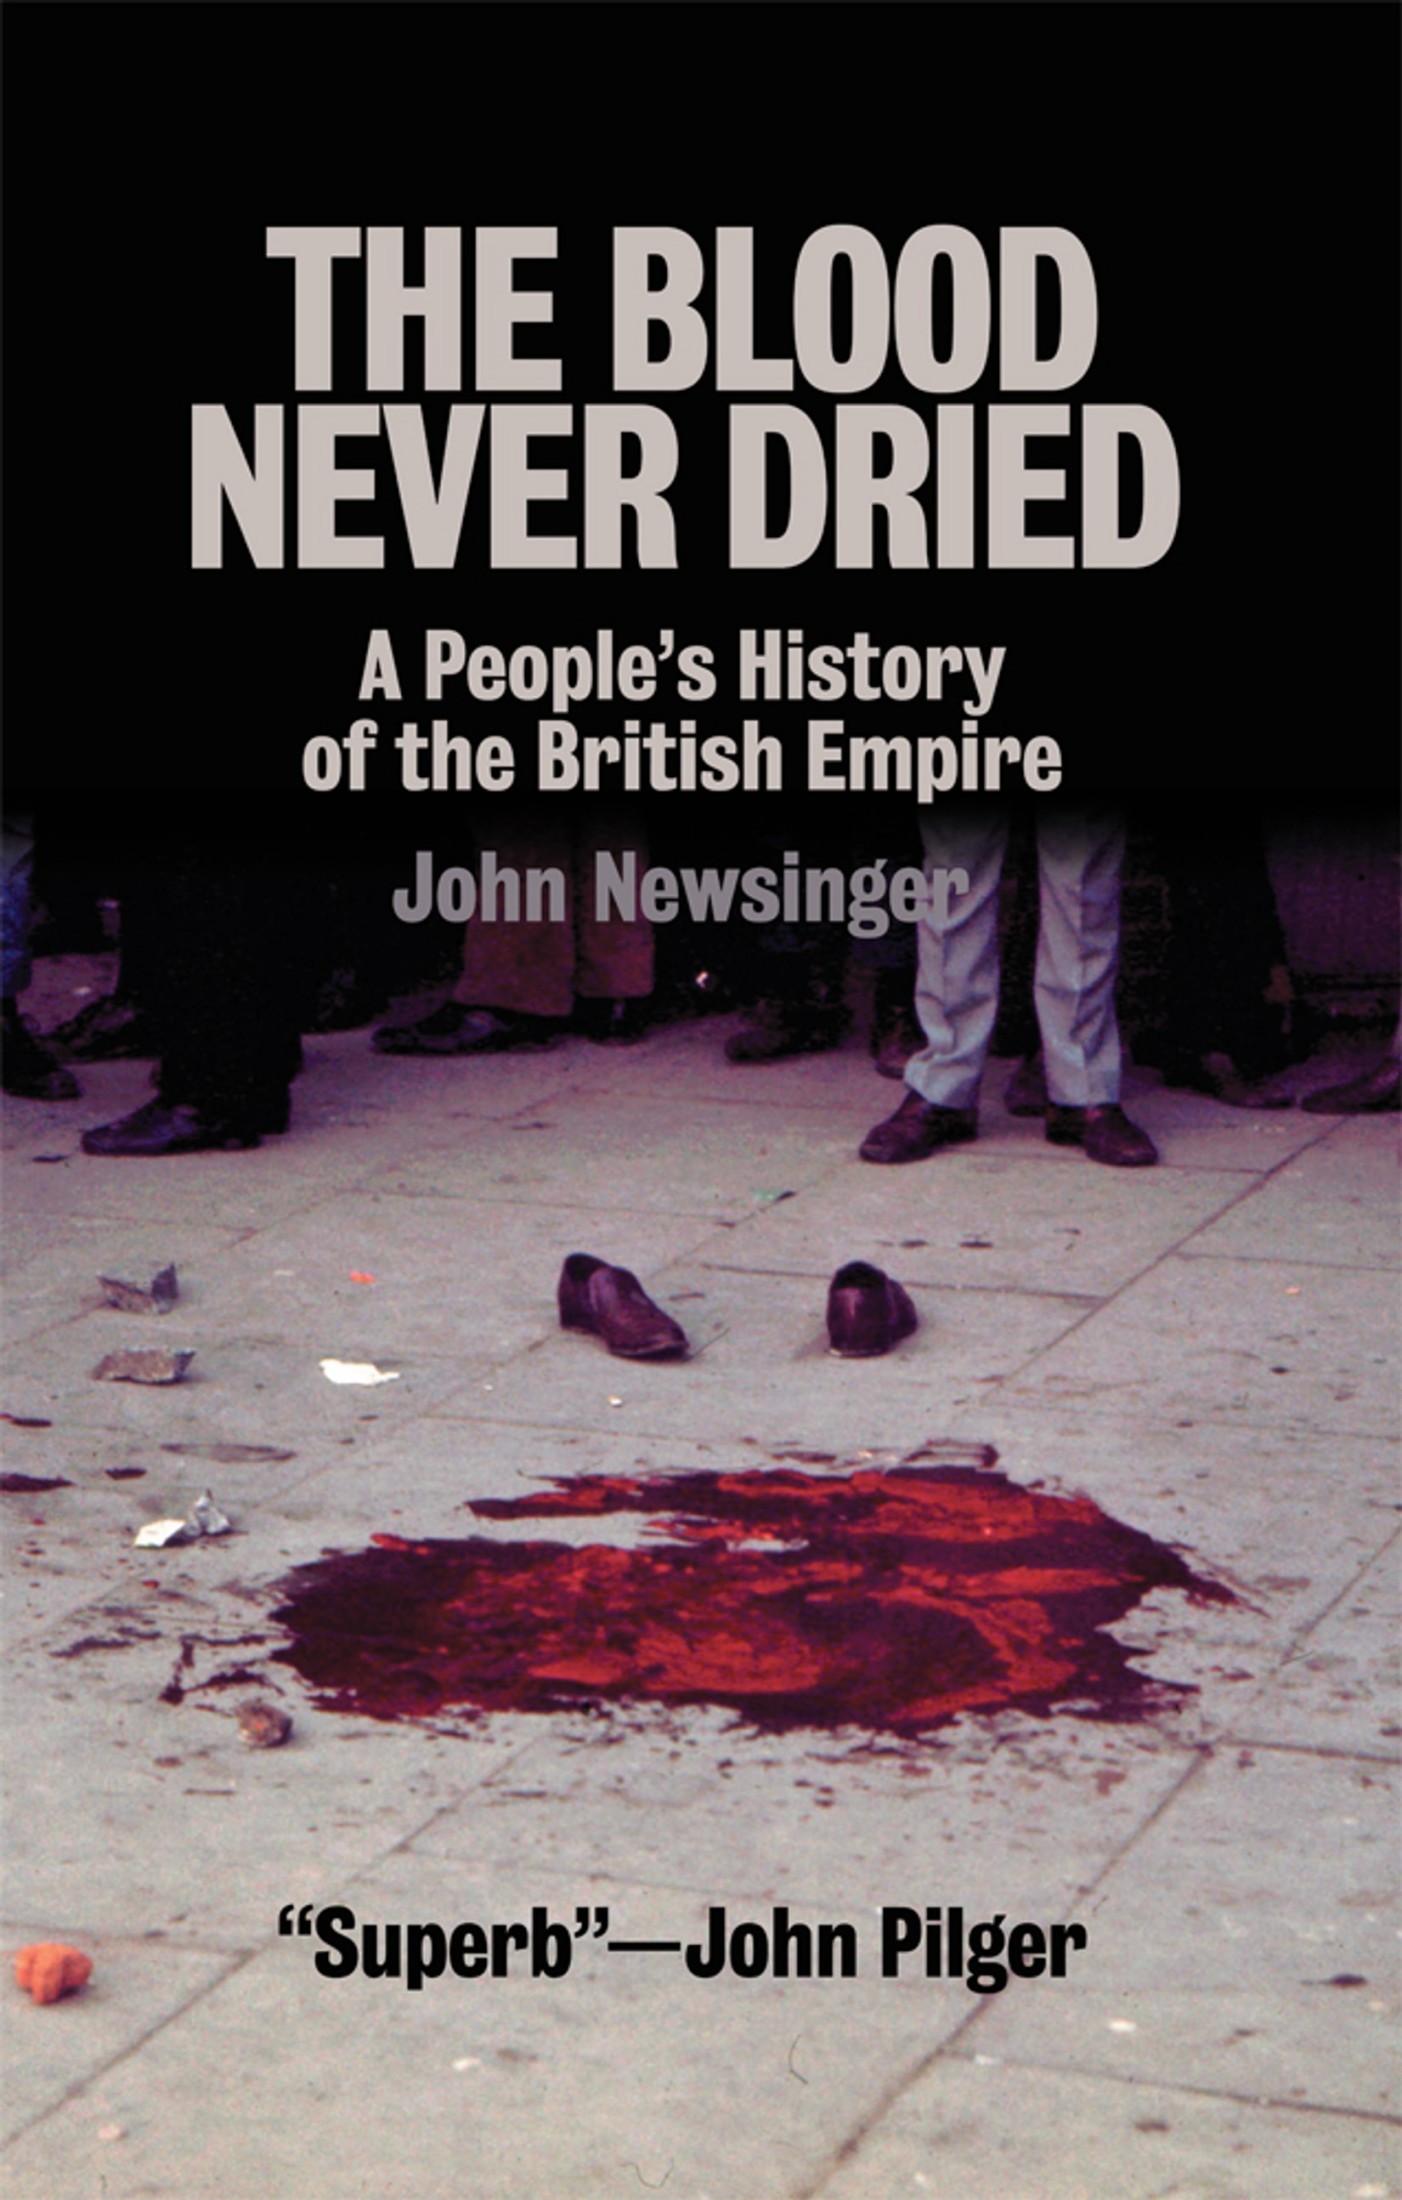 The Blood Never Dried: A People's History of the British Empire